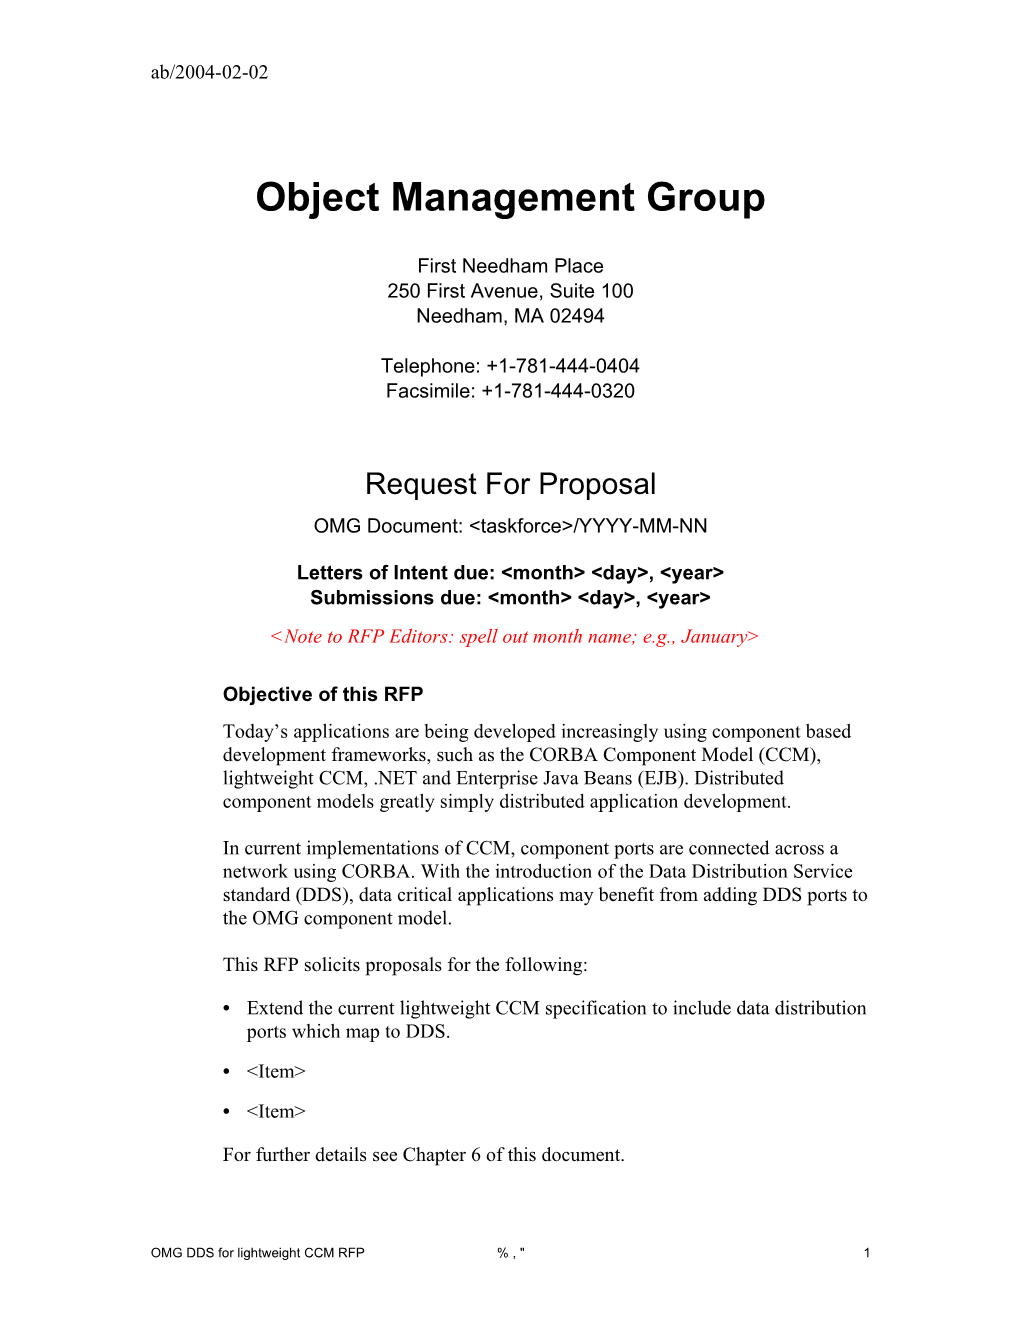 Object Management Group s2